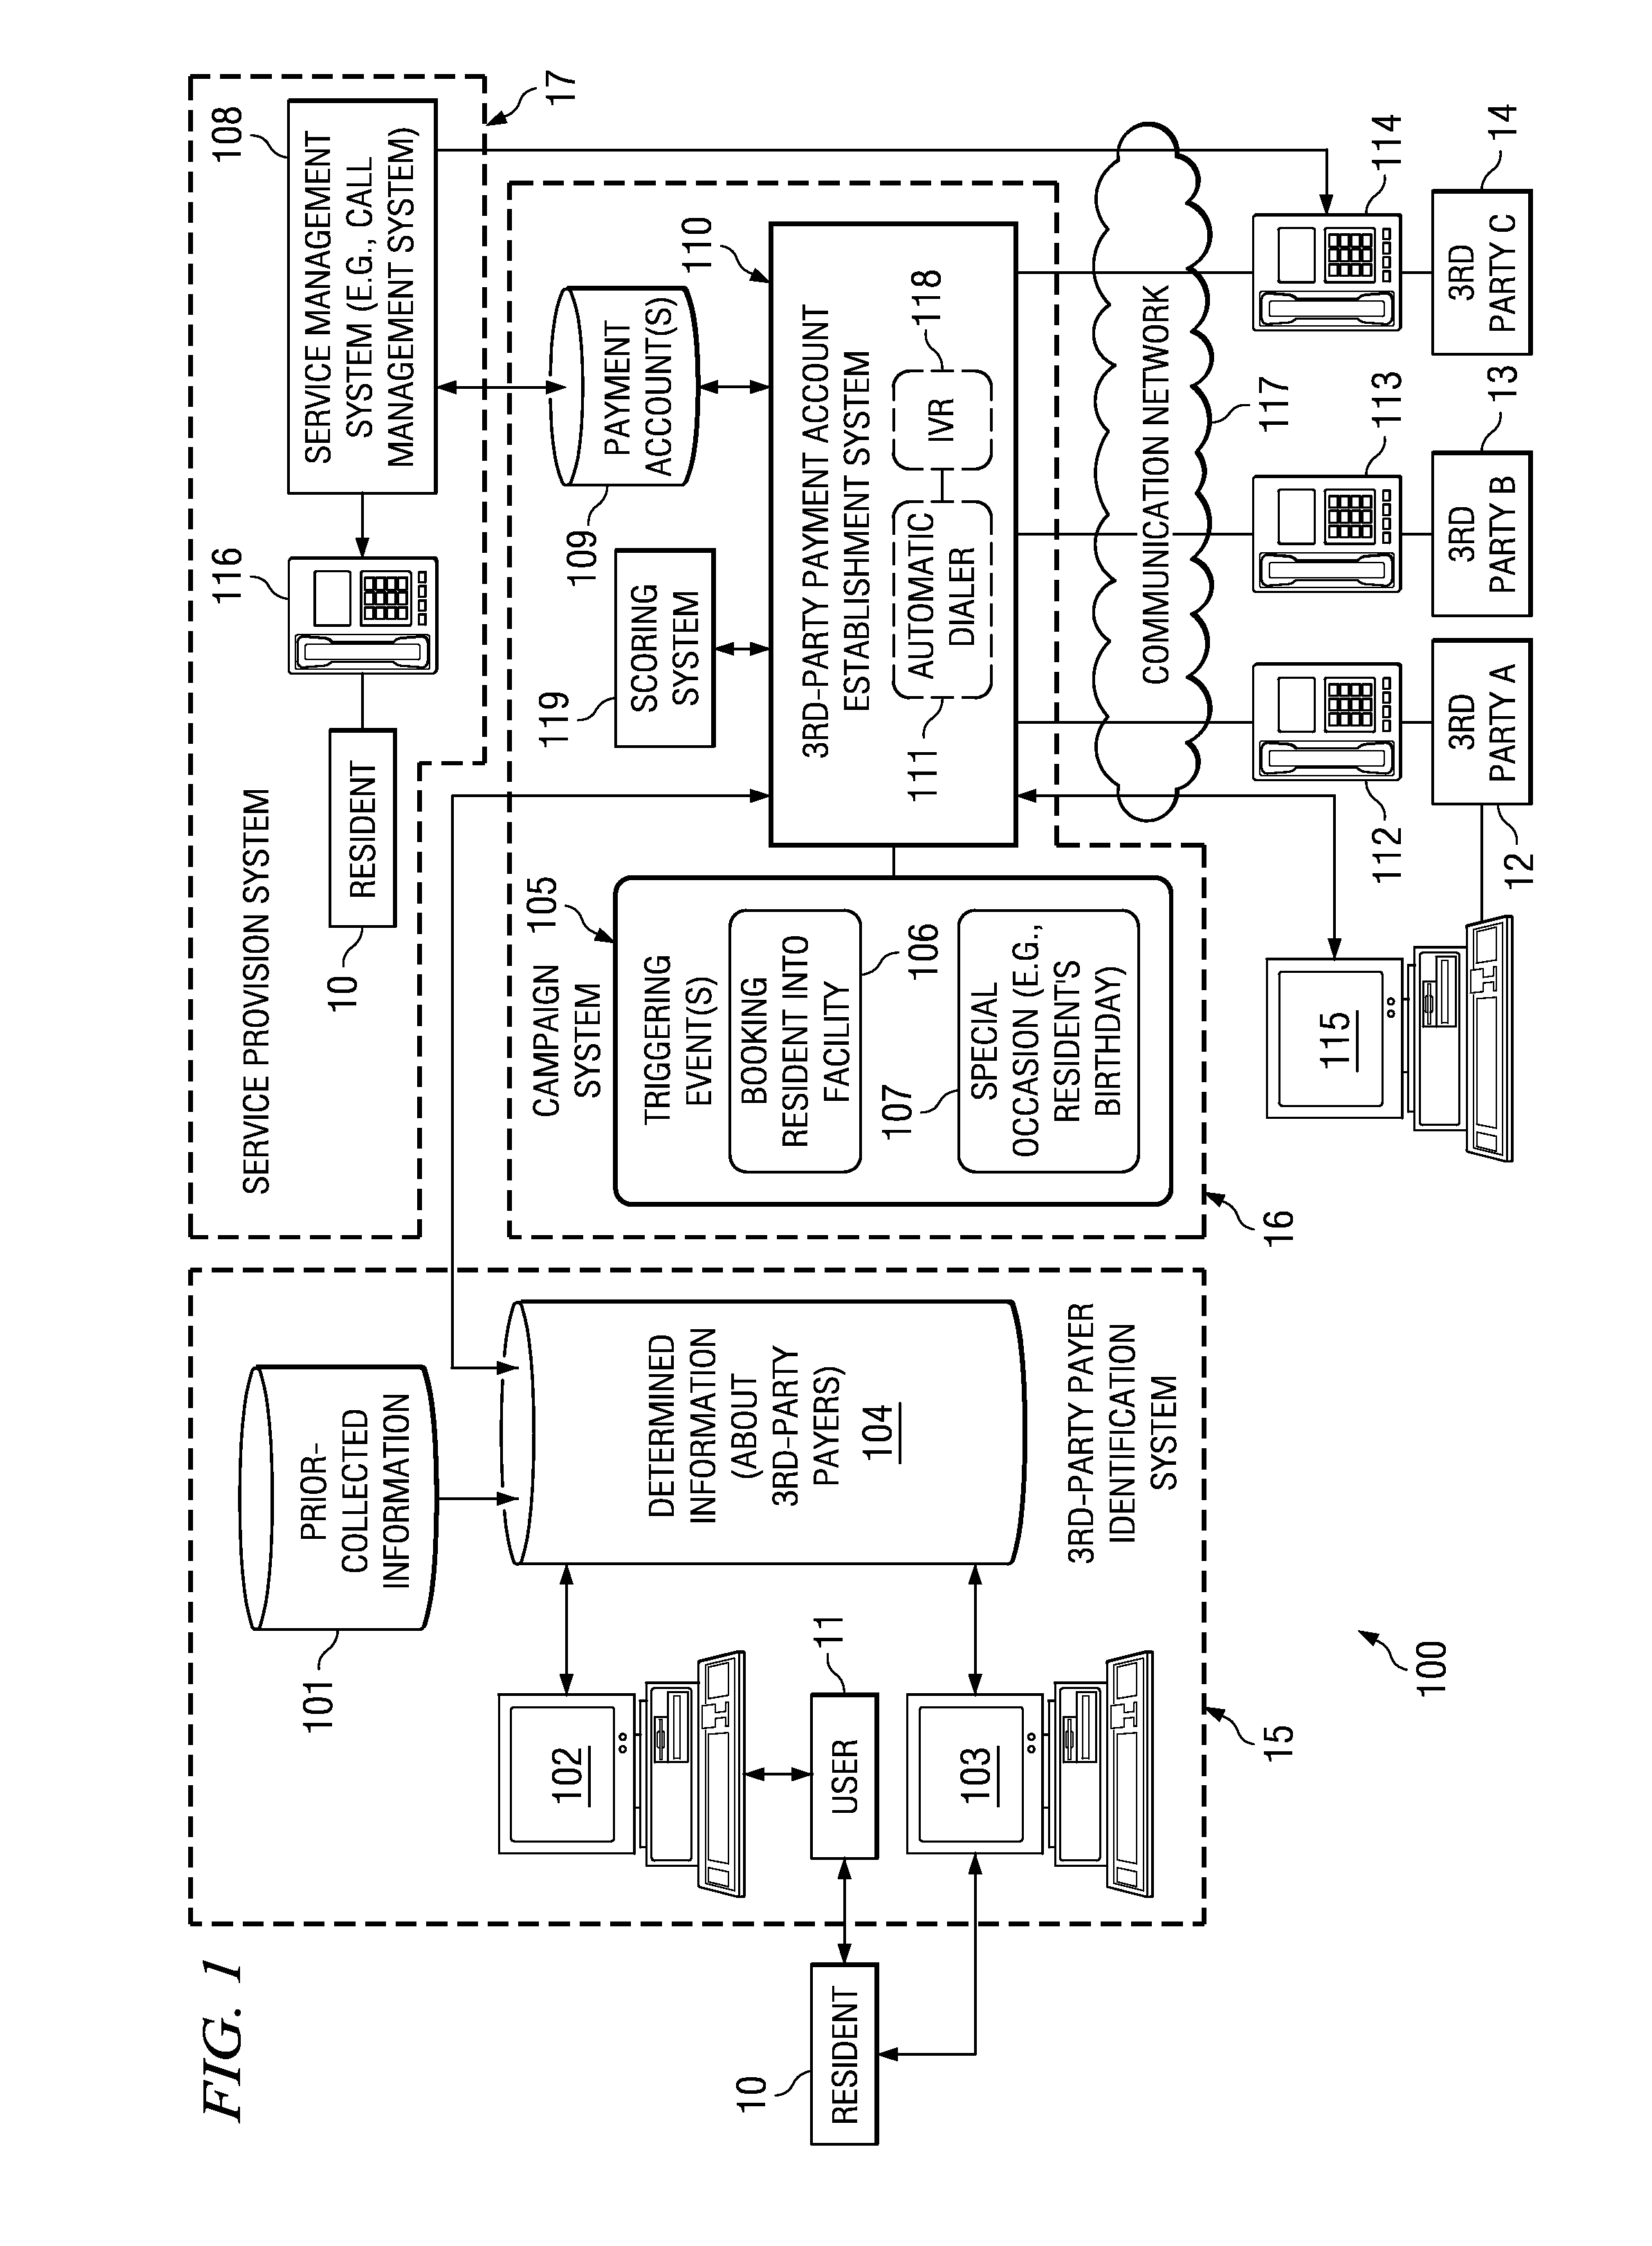 System and Method for Proactively Establishing a Third-Party Payment Account for Services Rendered to a Resident of a Controlled-Environment Facility